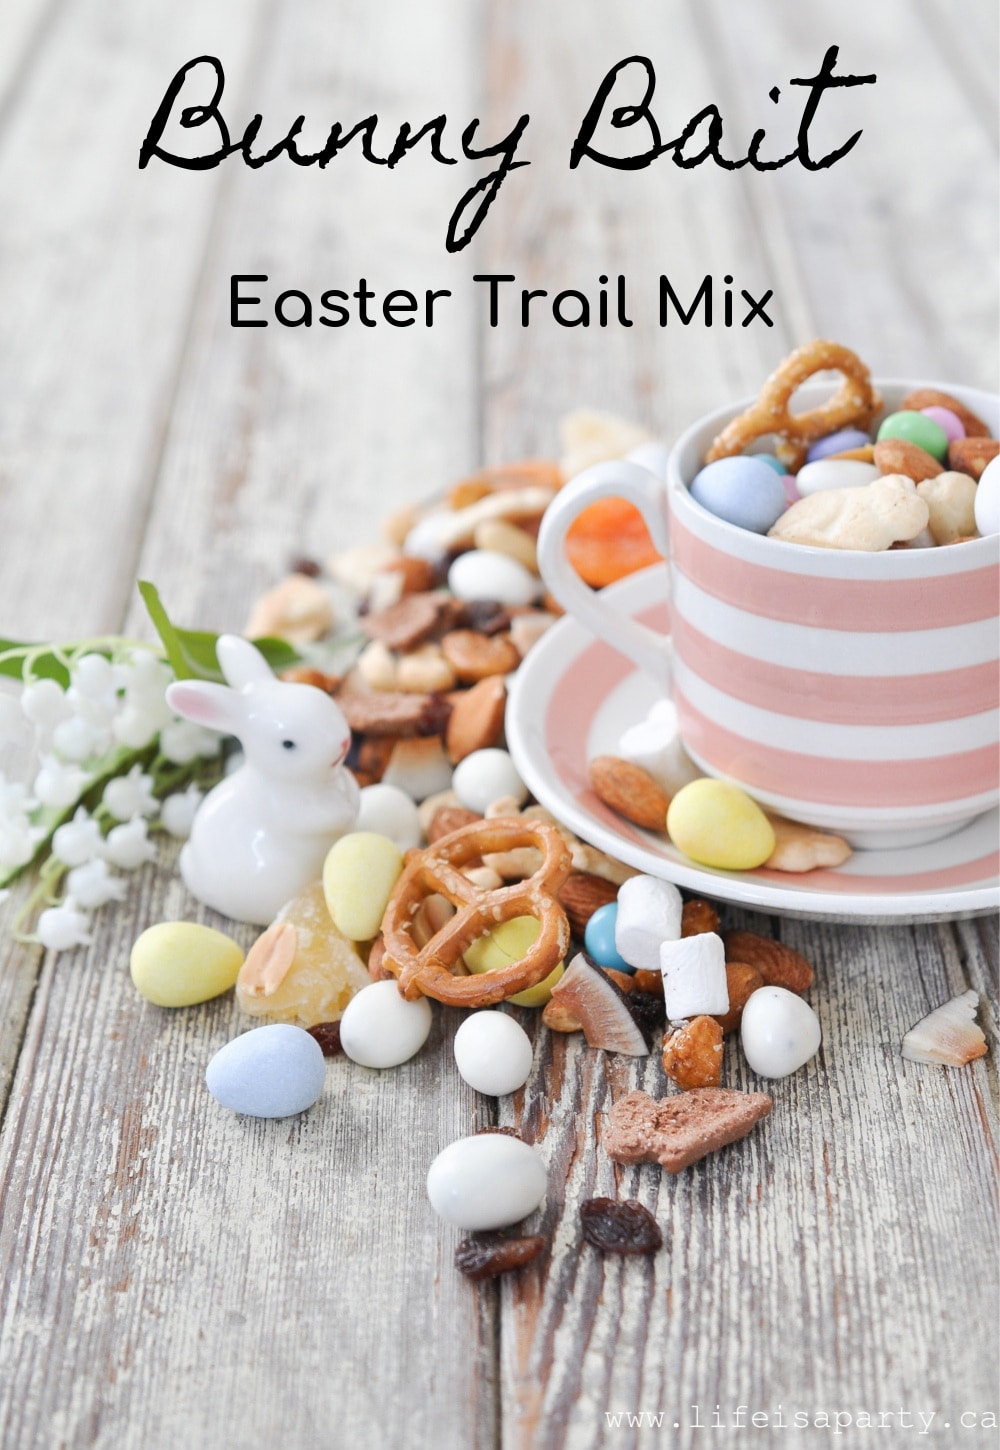 Bunny Bait Easter Trail Mix -trail mix, with some fun Easter additions like graham cracker bunnies, and Easter eggs, also a free printable Bunny Bait label.